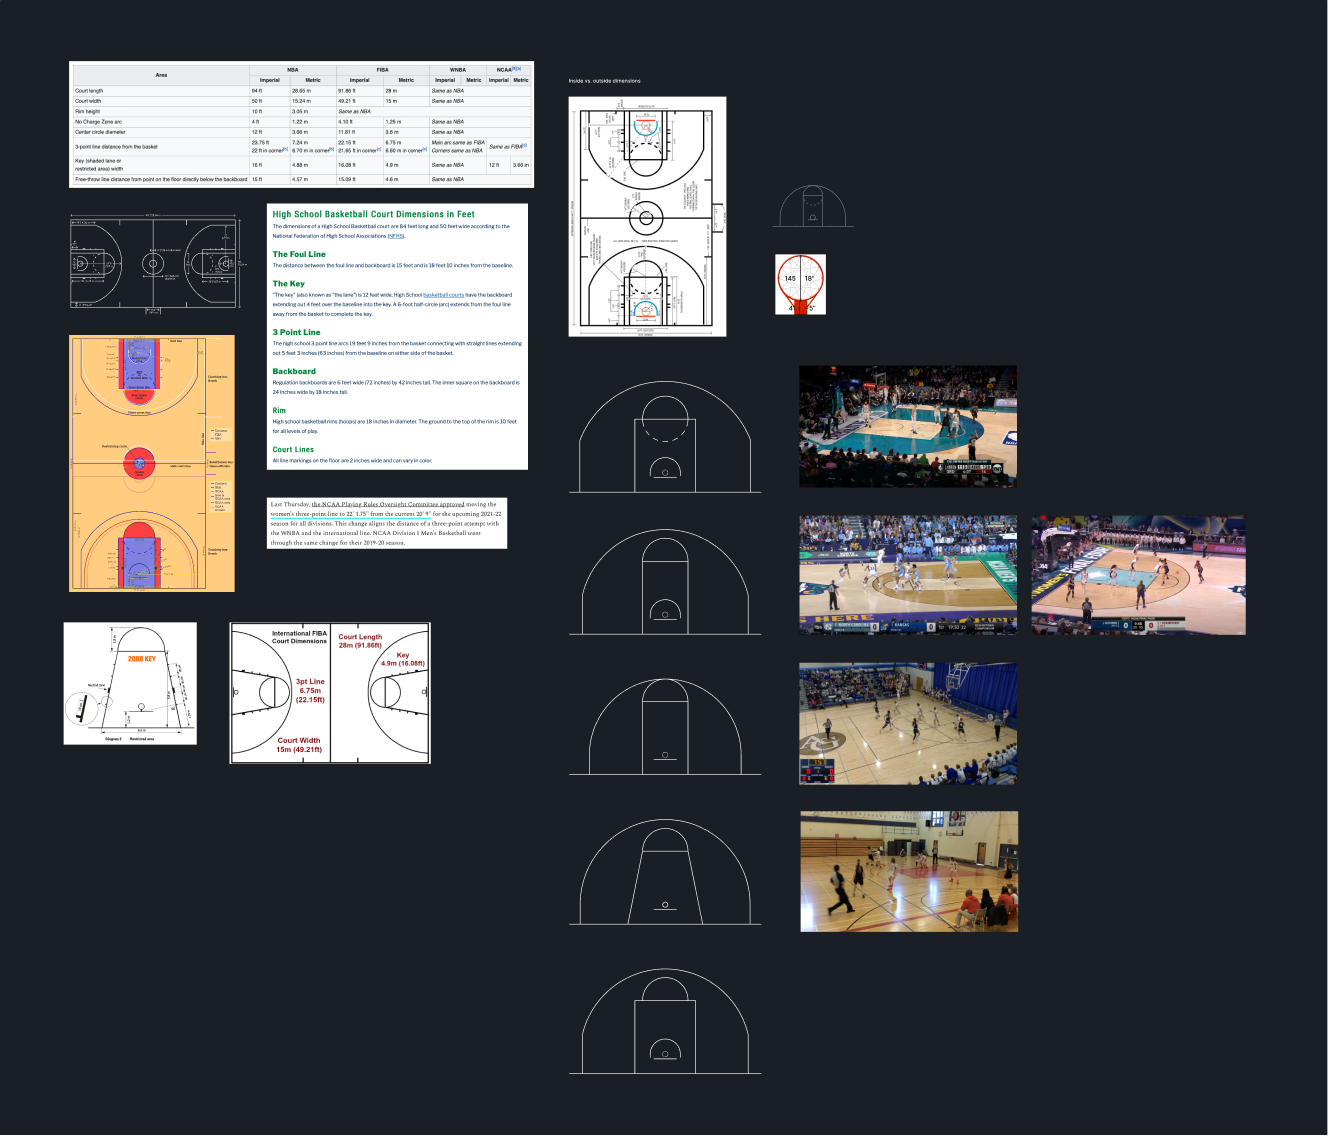 A Figma workspace showing several different courts, along with screenshots of video for several of the courts. There is a table of court dimensions as well.